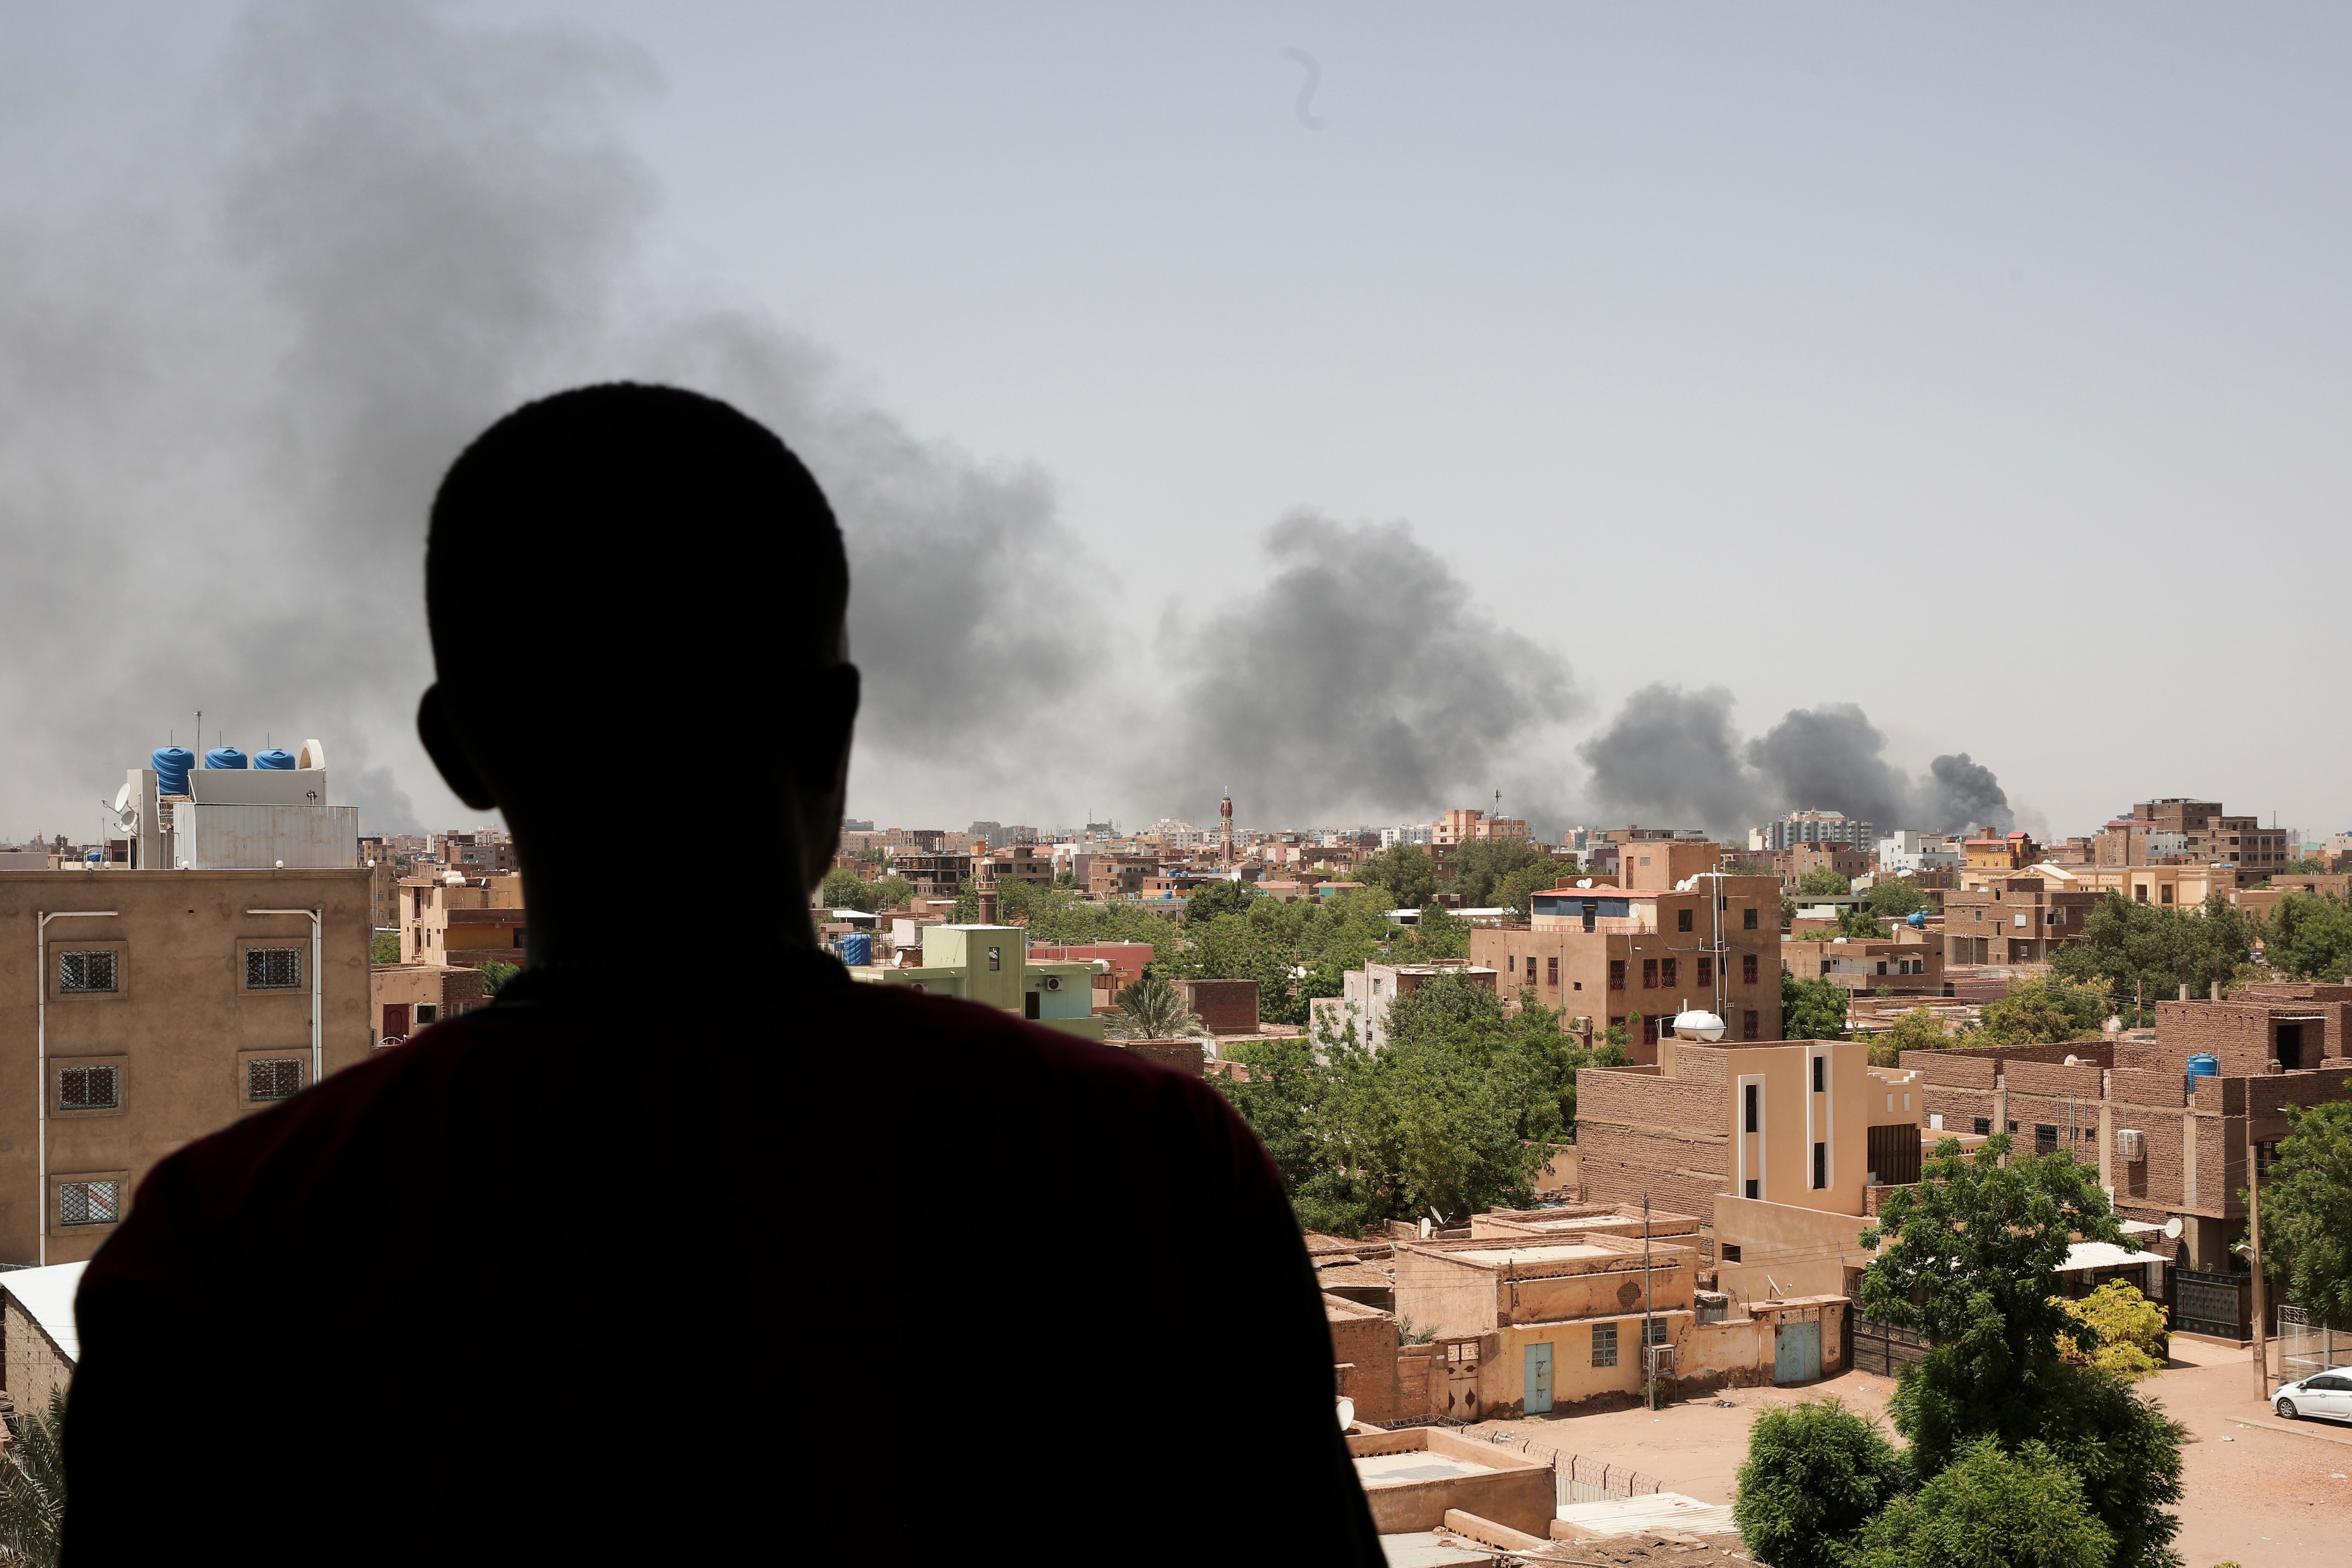 Scenes from Sudan as fighting continues